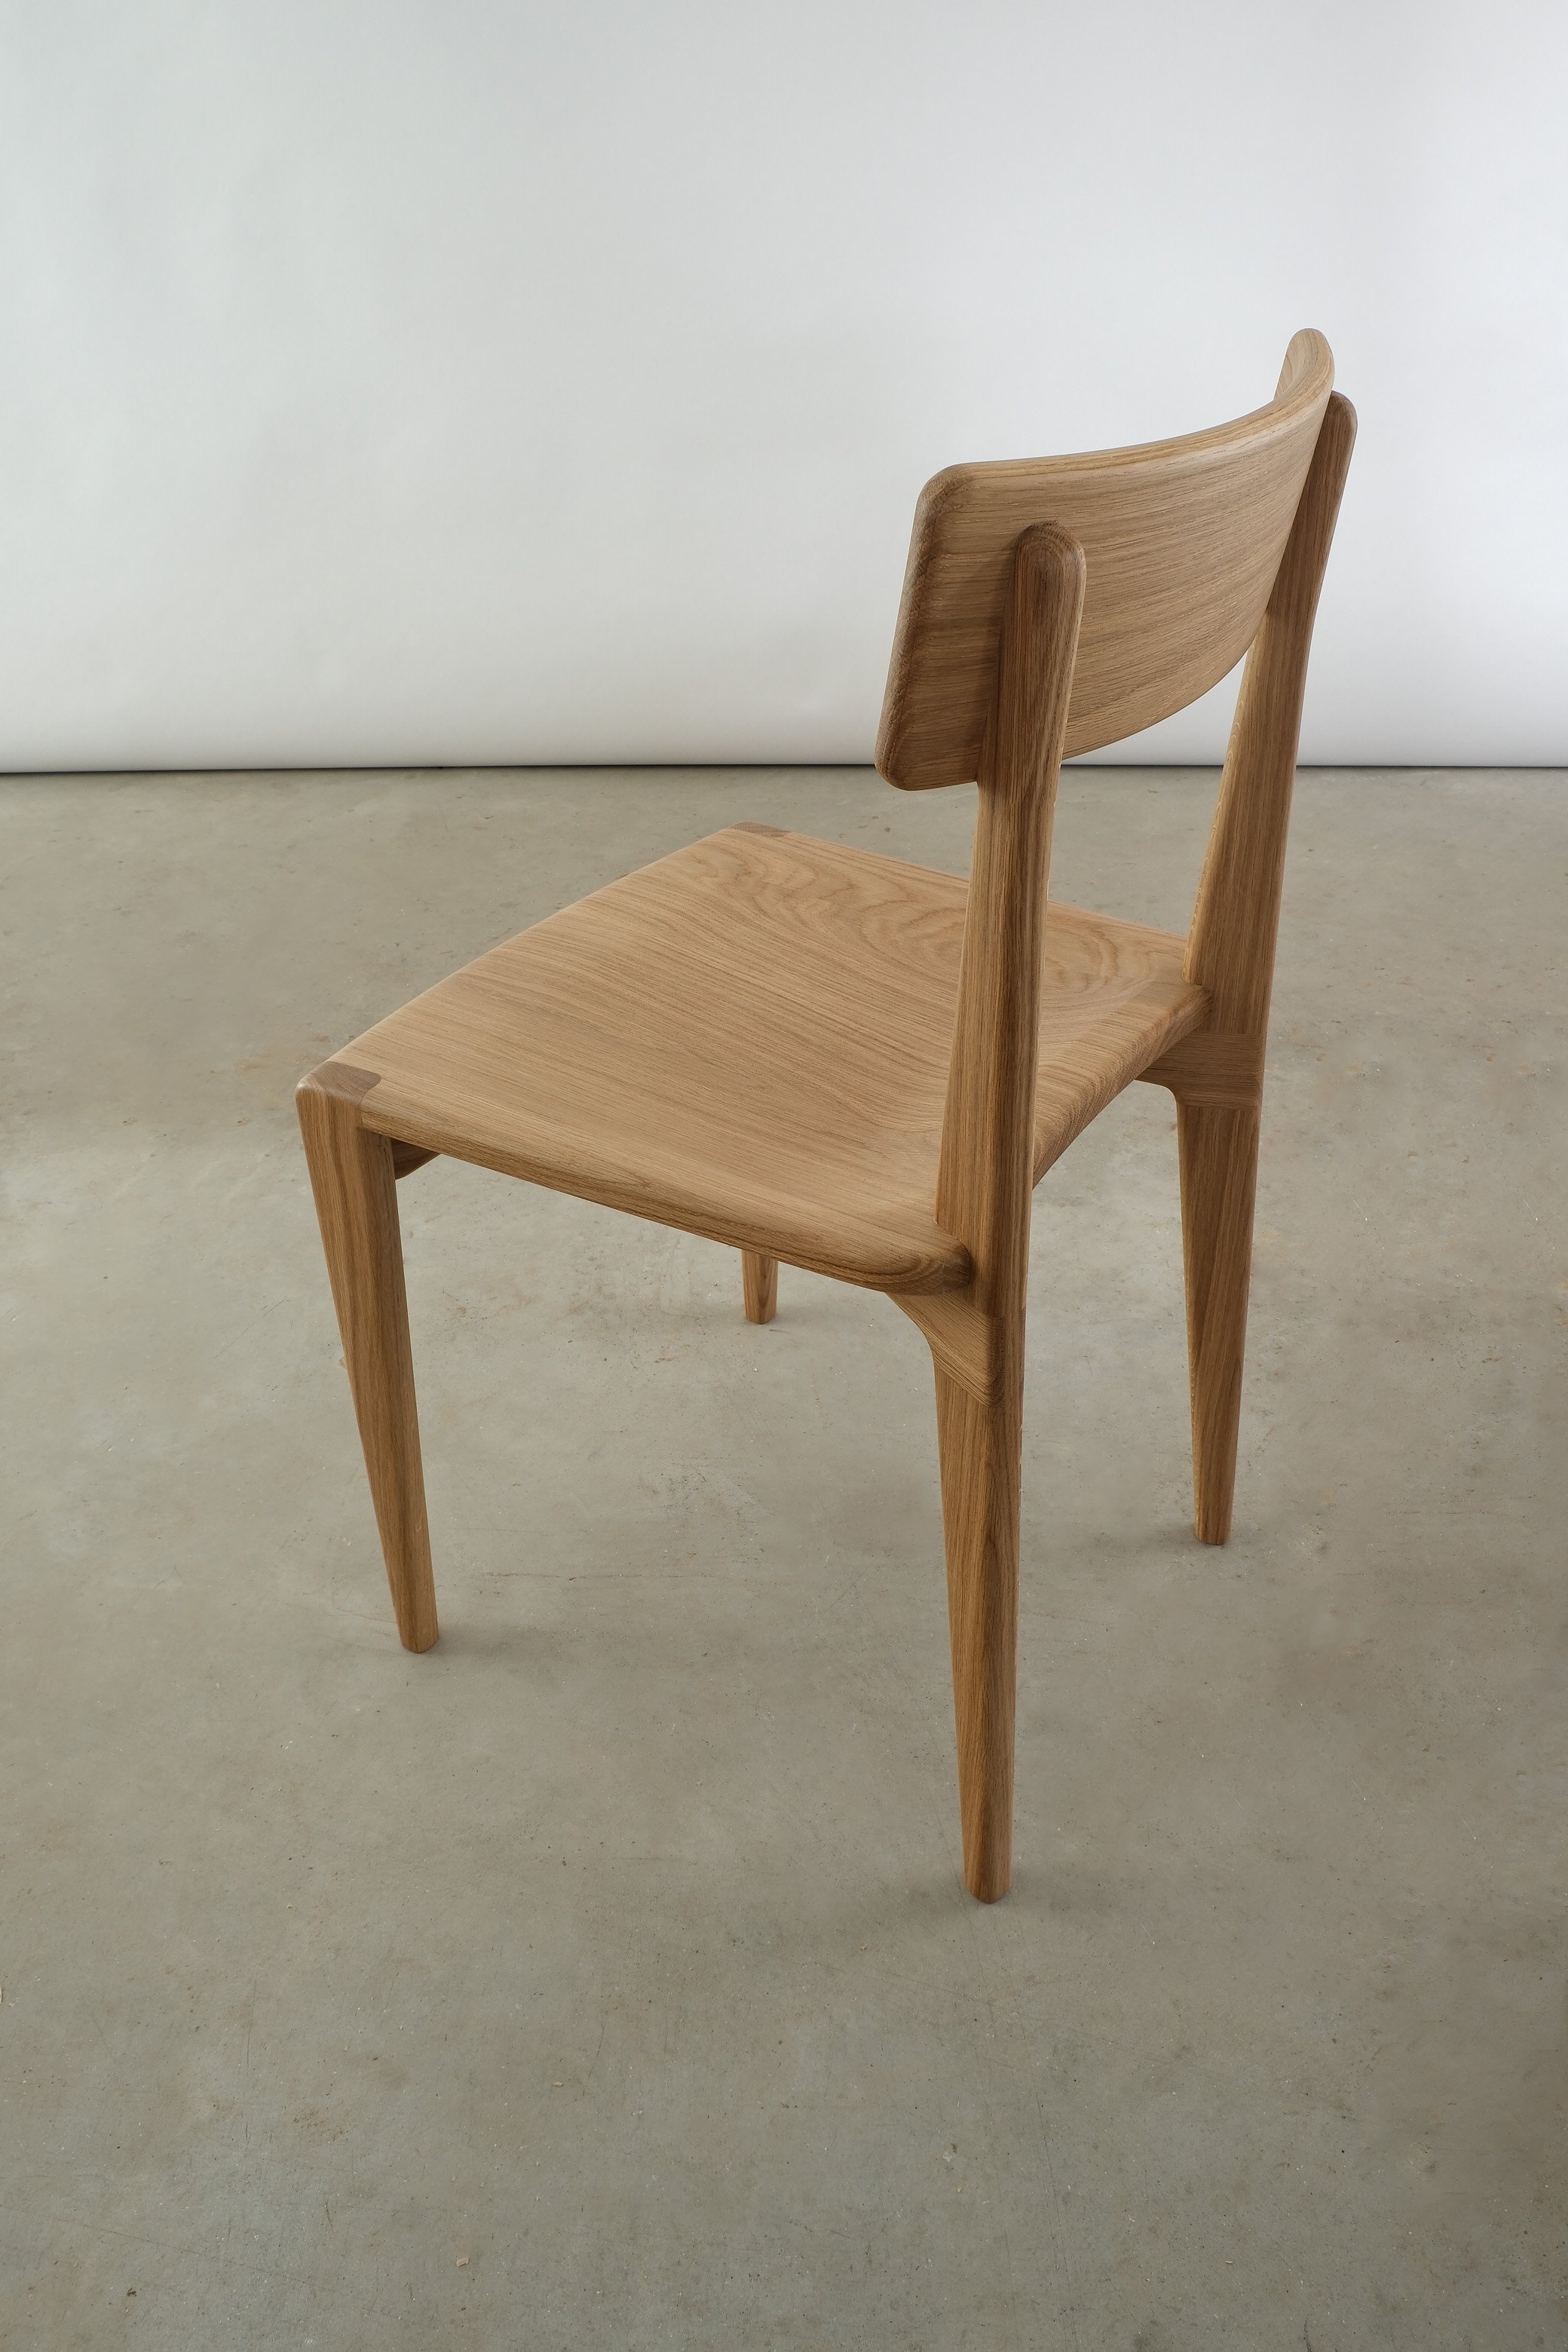 durham chair in oak with white background 3:4 back view higher angle.JPG